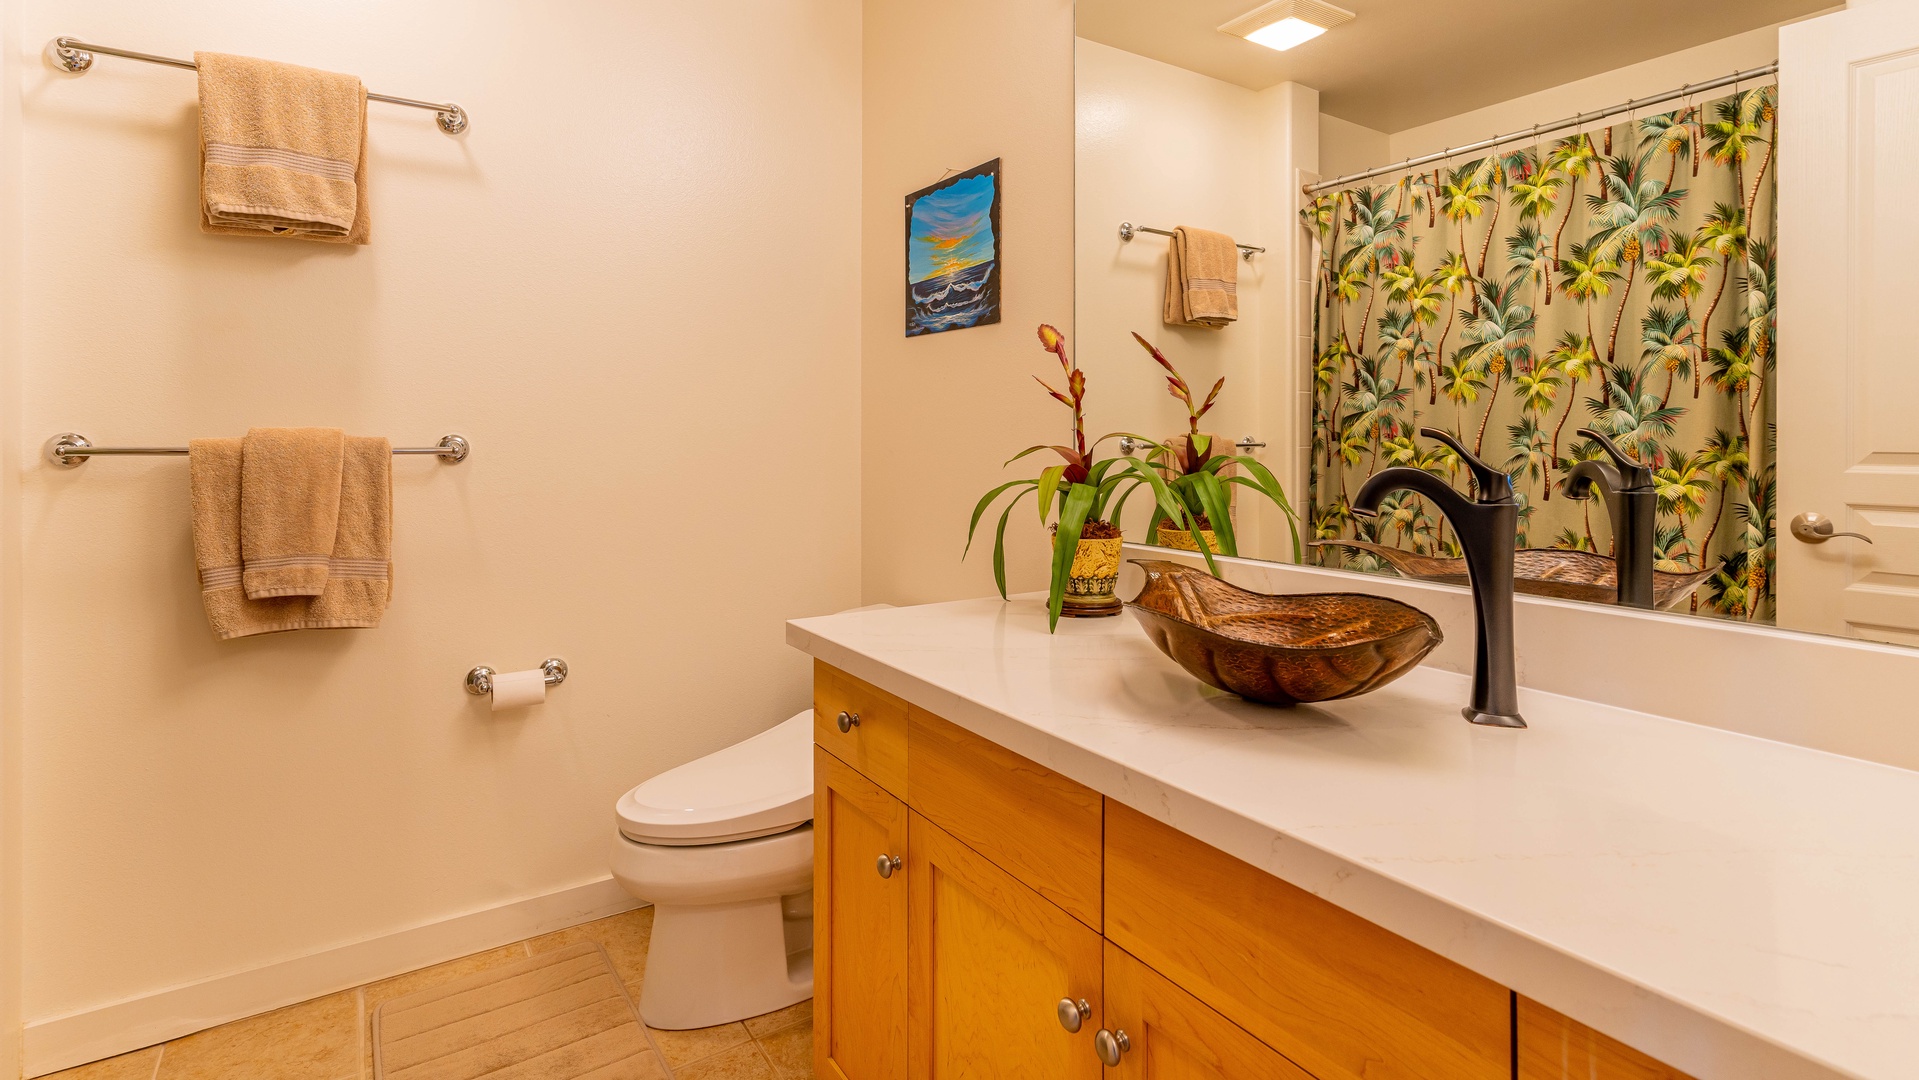 Kapolei Vacation Rentals, Kai Lani 20C - The second guest bath with warm wood tones and a shower.